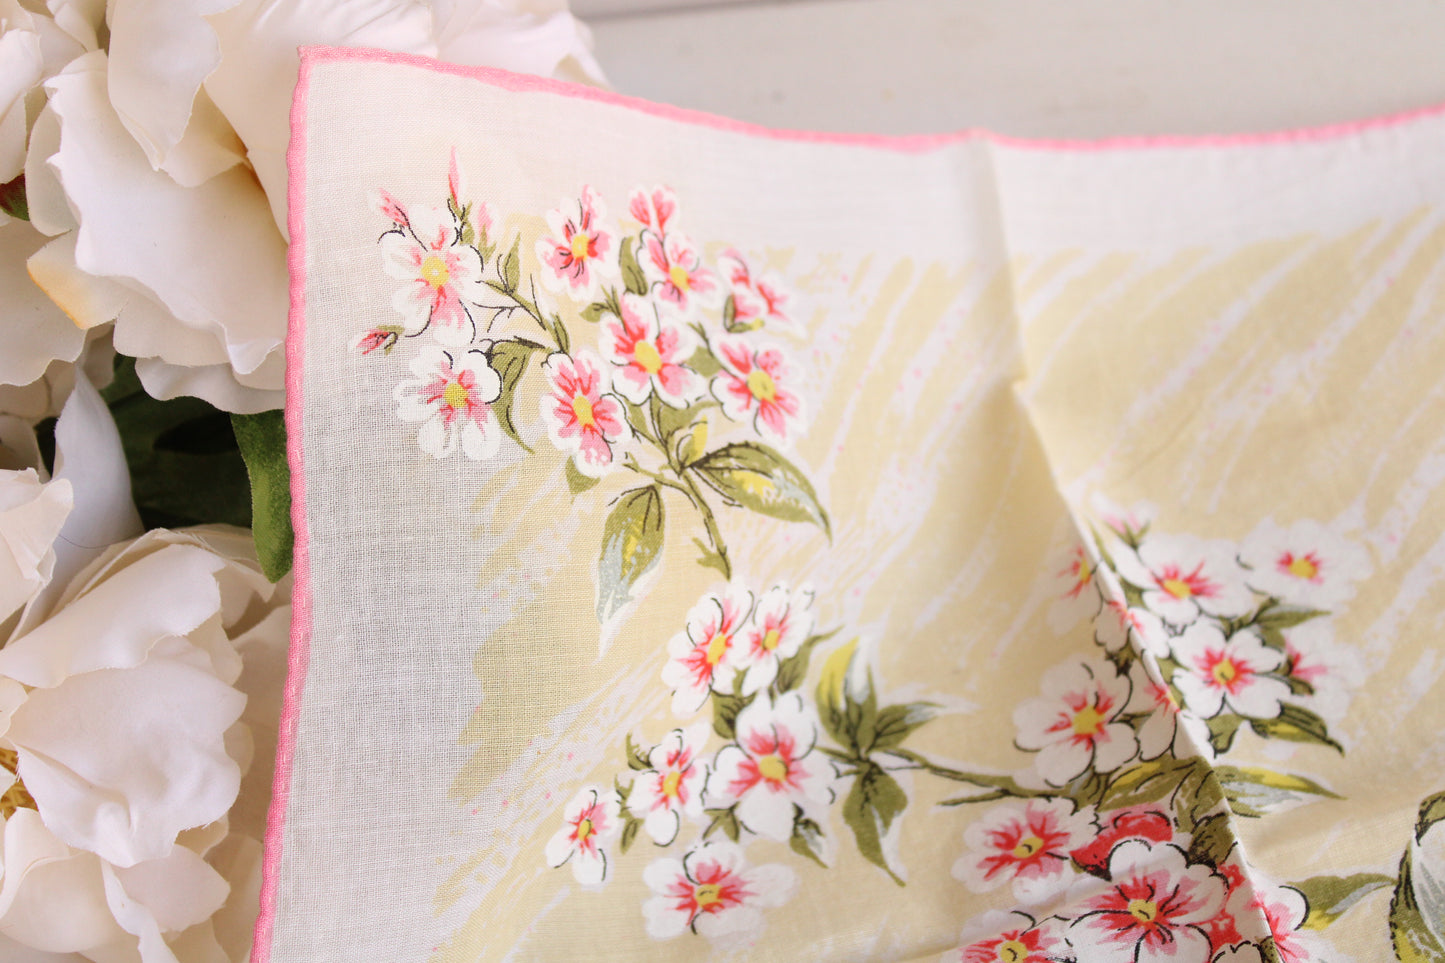 Vintage Pink and Yellow Floral Handkerchief